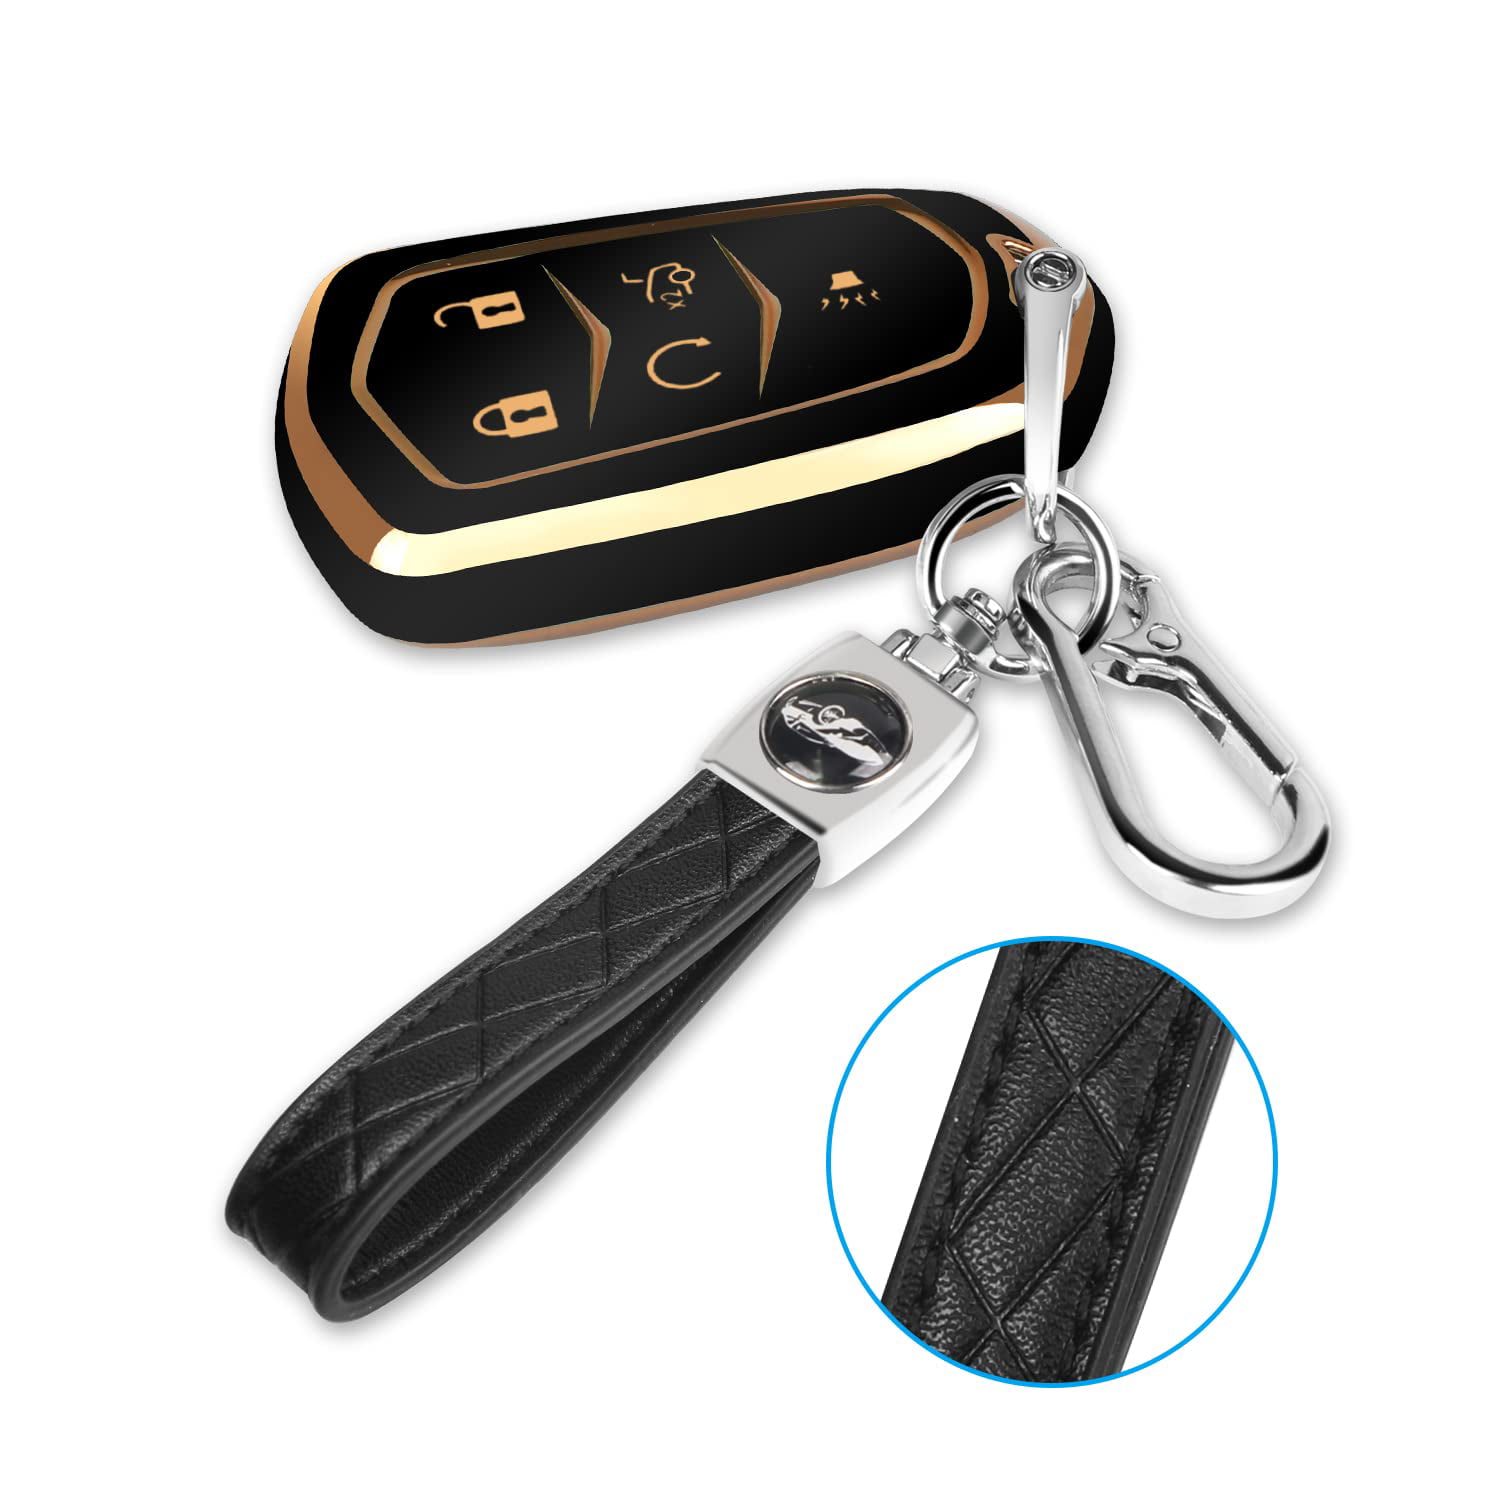  1797 for Cadillac Key Fob Cover SRX XT5 XT4 CTS ATS CT6 XT6 XTS  Accessories Car Key Chain Case Shell Protector 5 Button Women Girly Cute  TPU Gold : Automotive